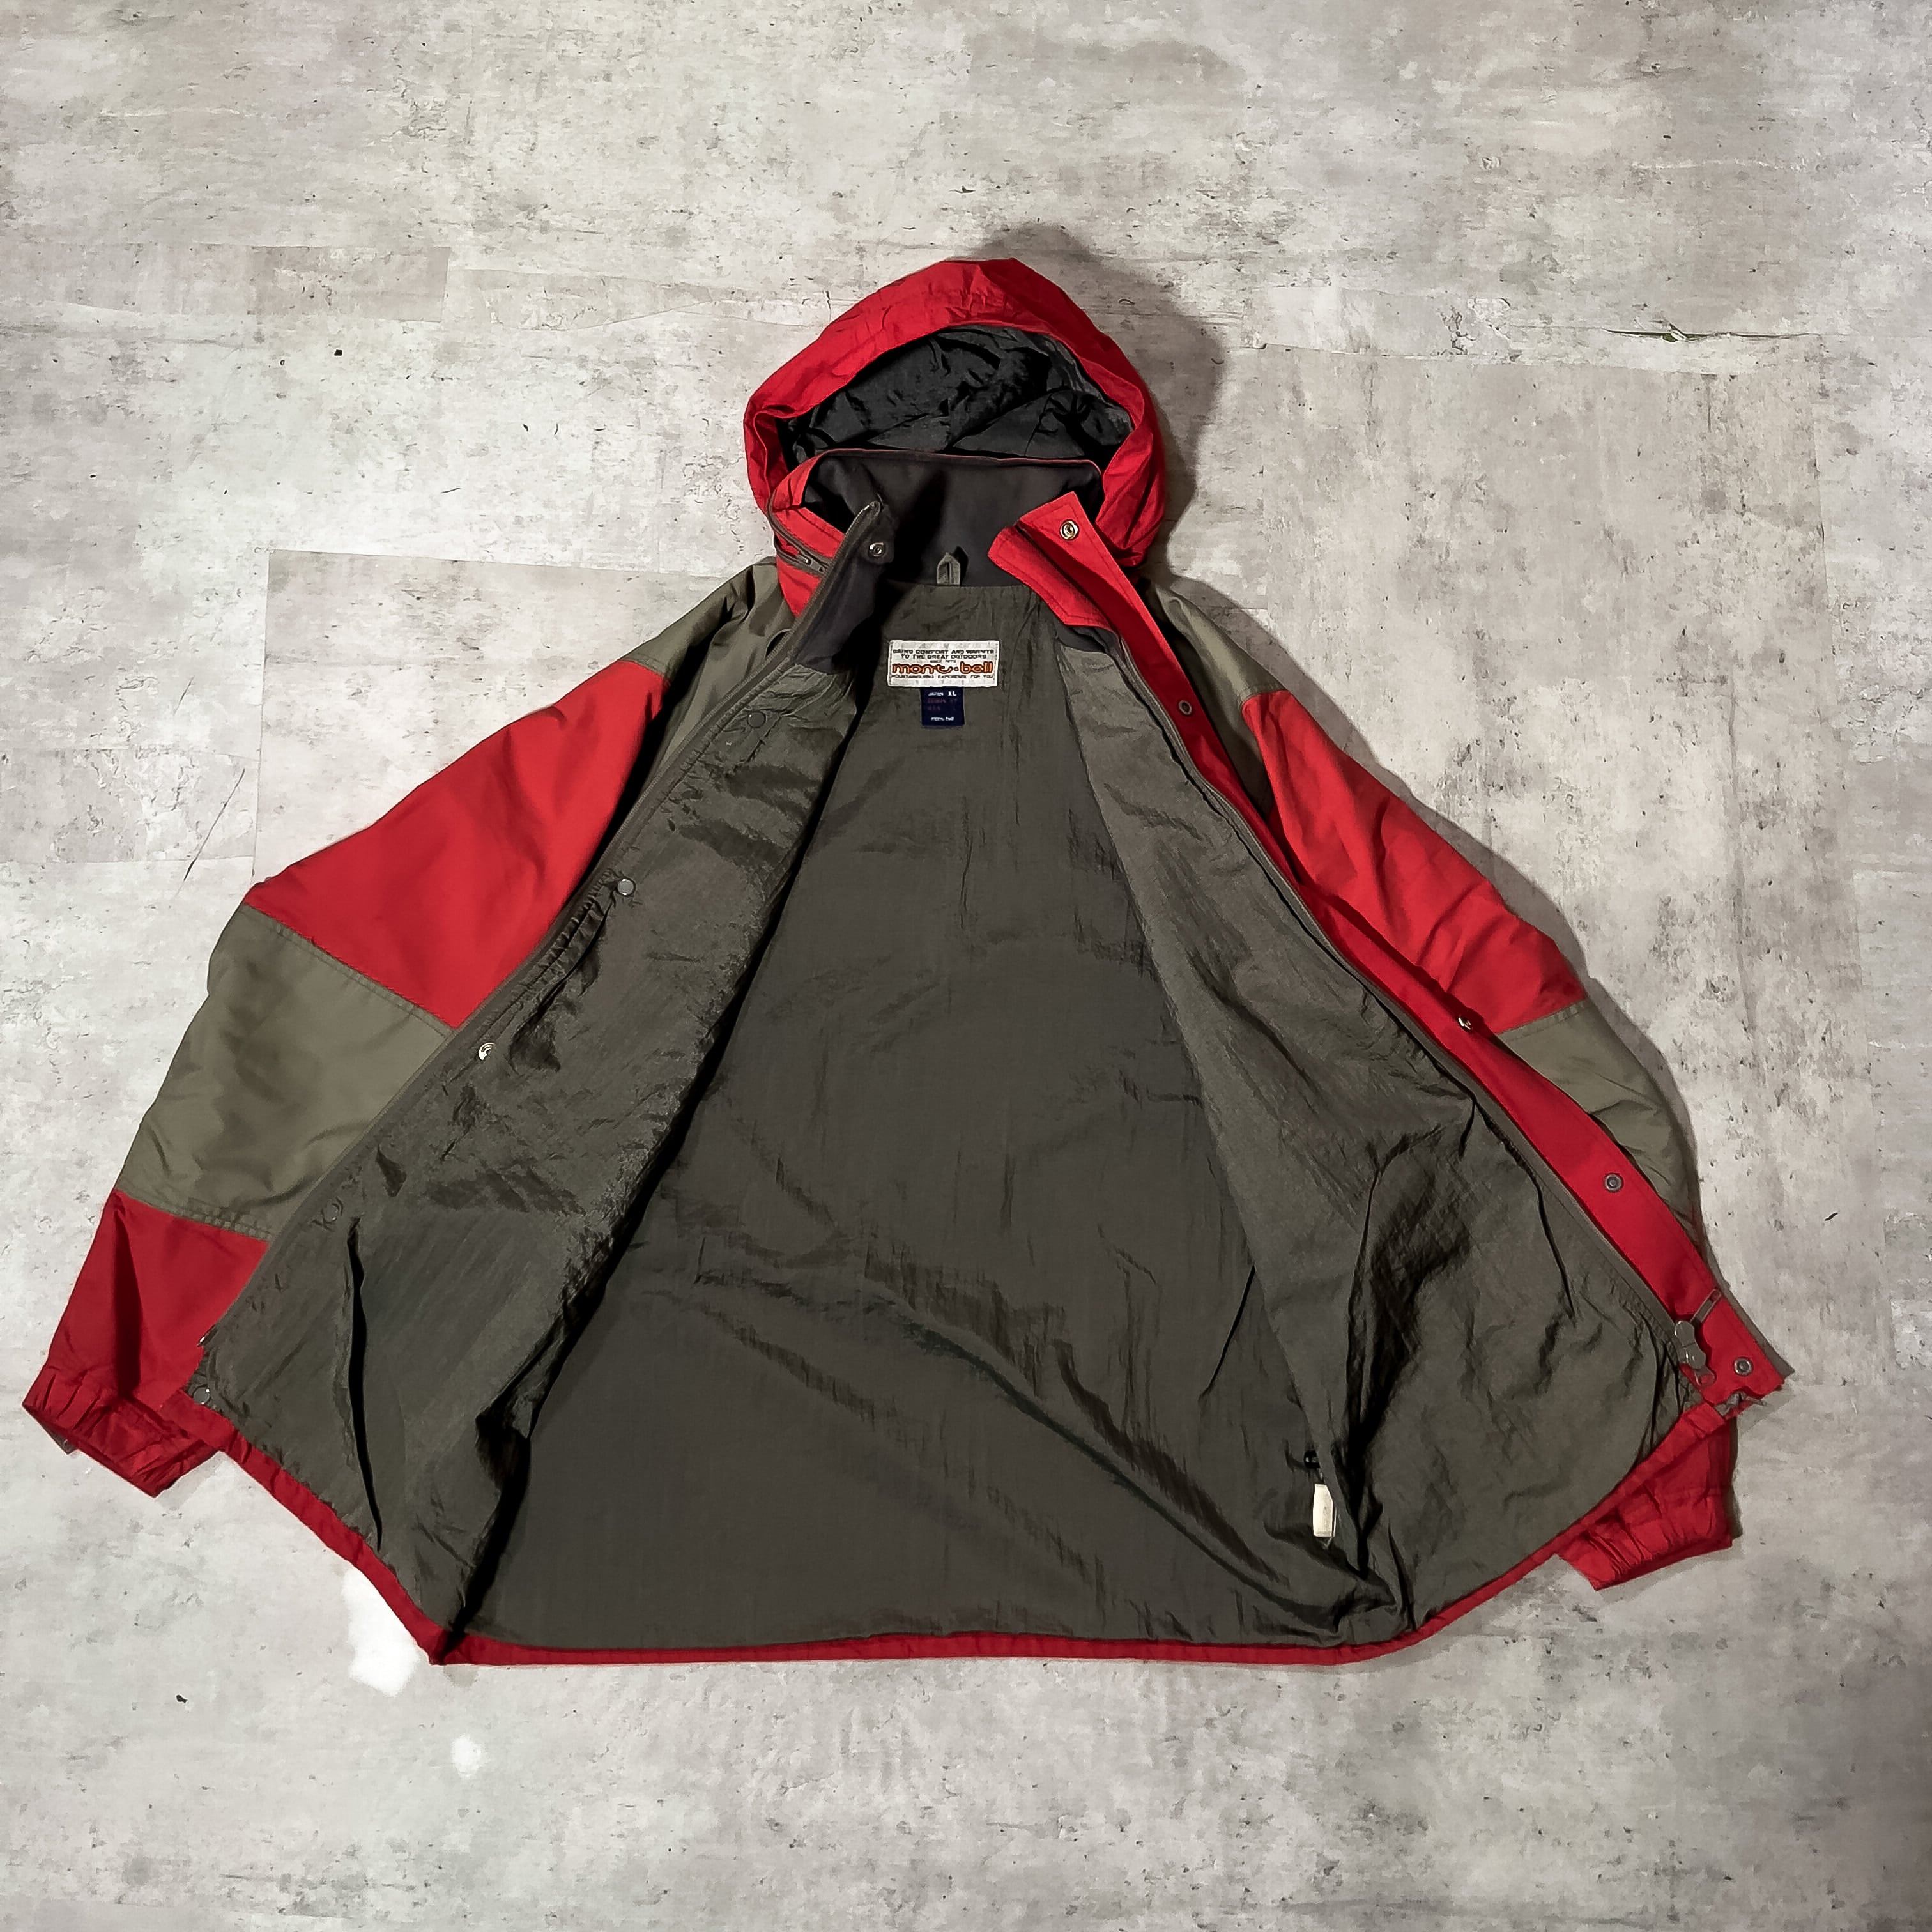 80s “mont-bell” gore-tex mountain parka 80年代 モンベル ゴアテック 